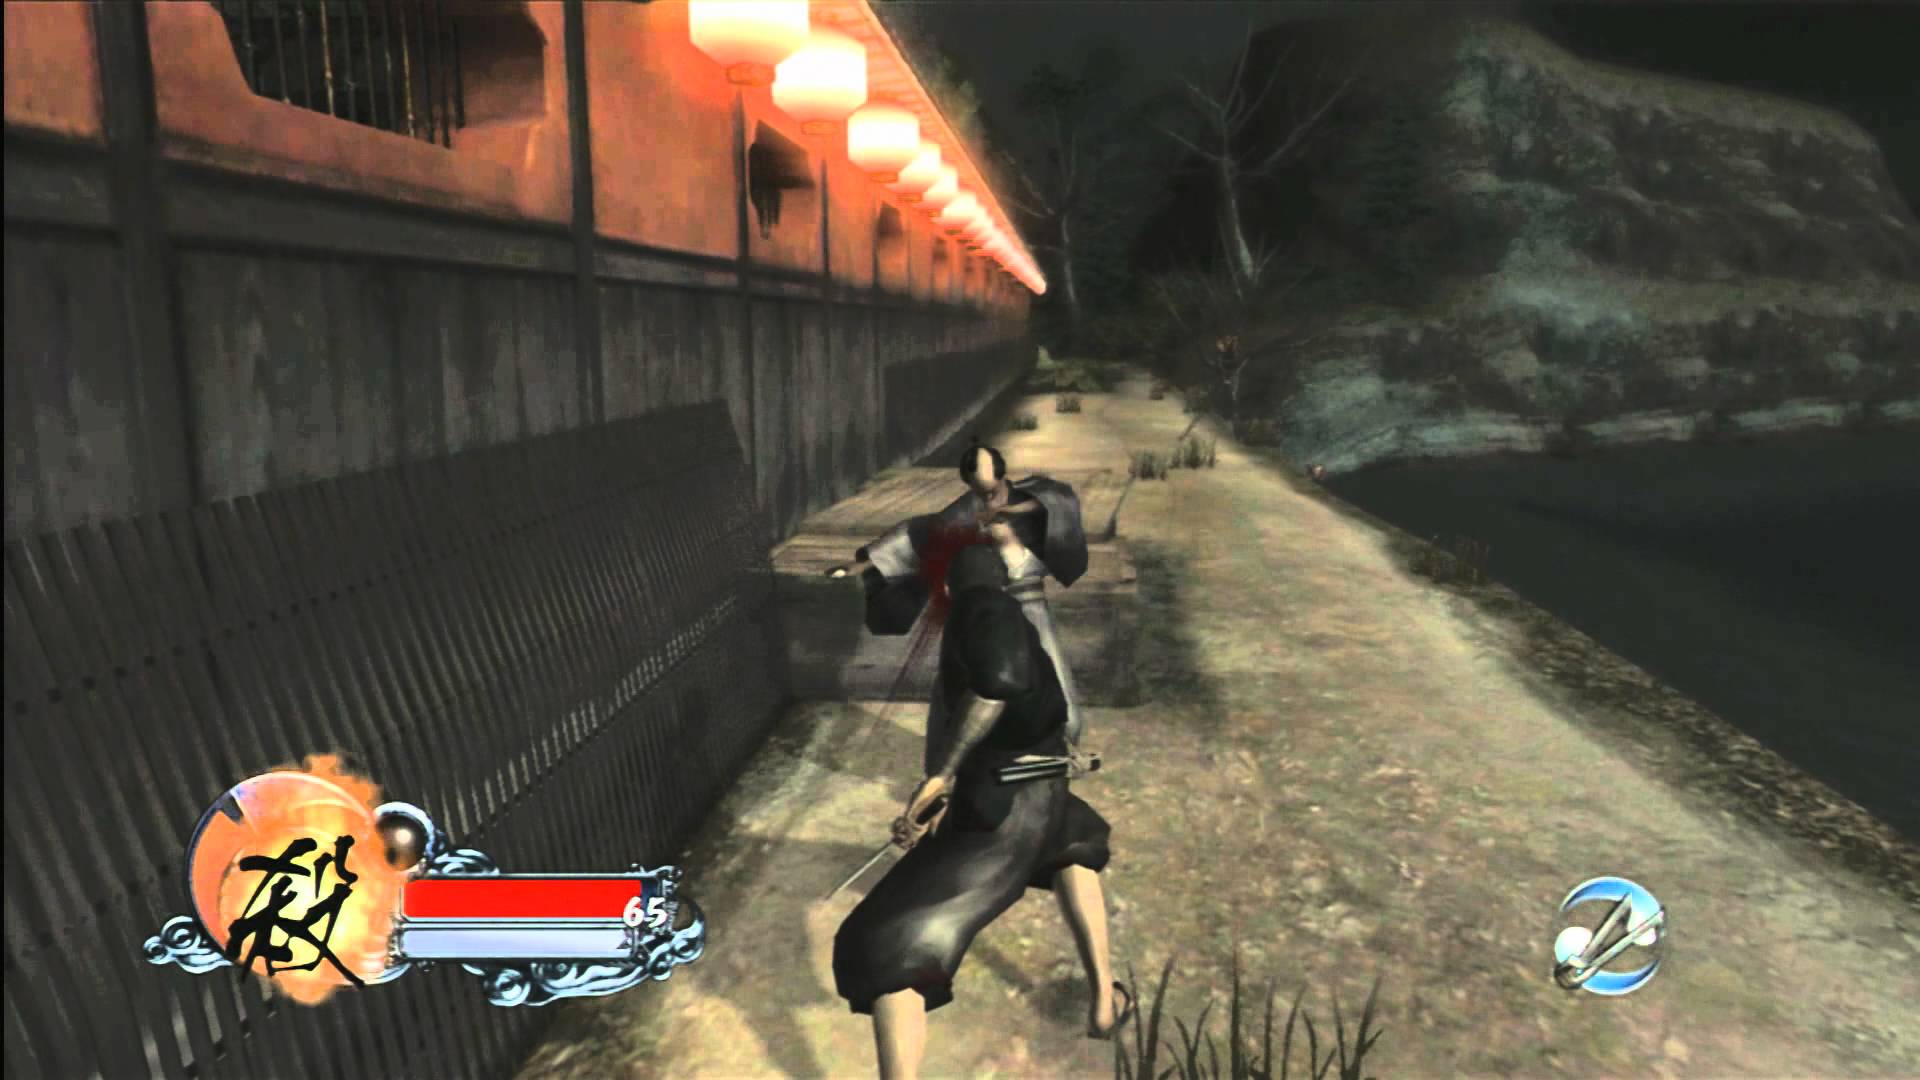 CGRundertow TENCHU Z for Xbox 360 Video Game Review